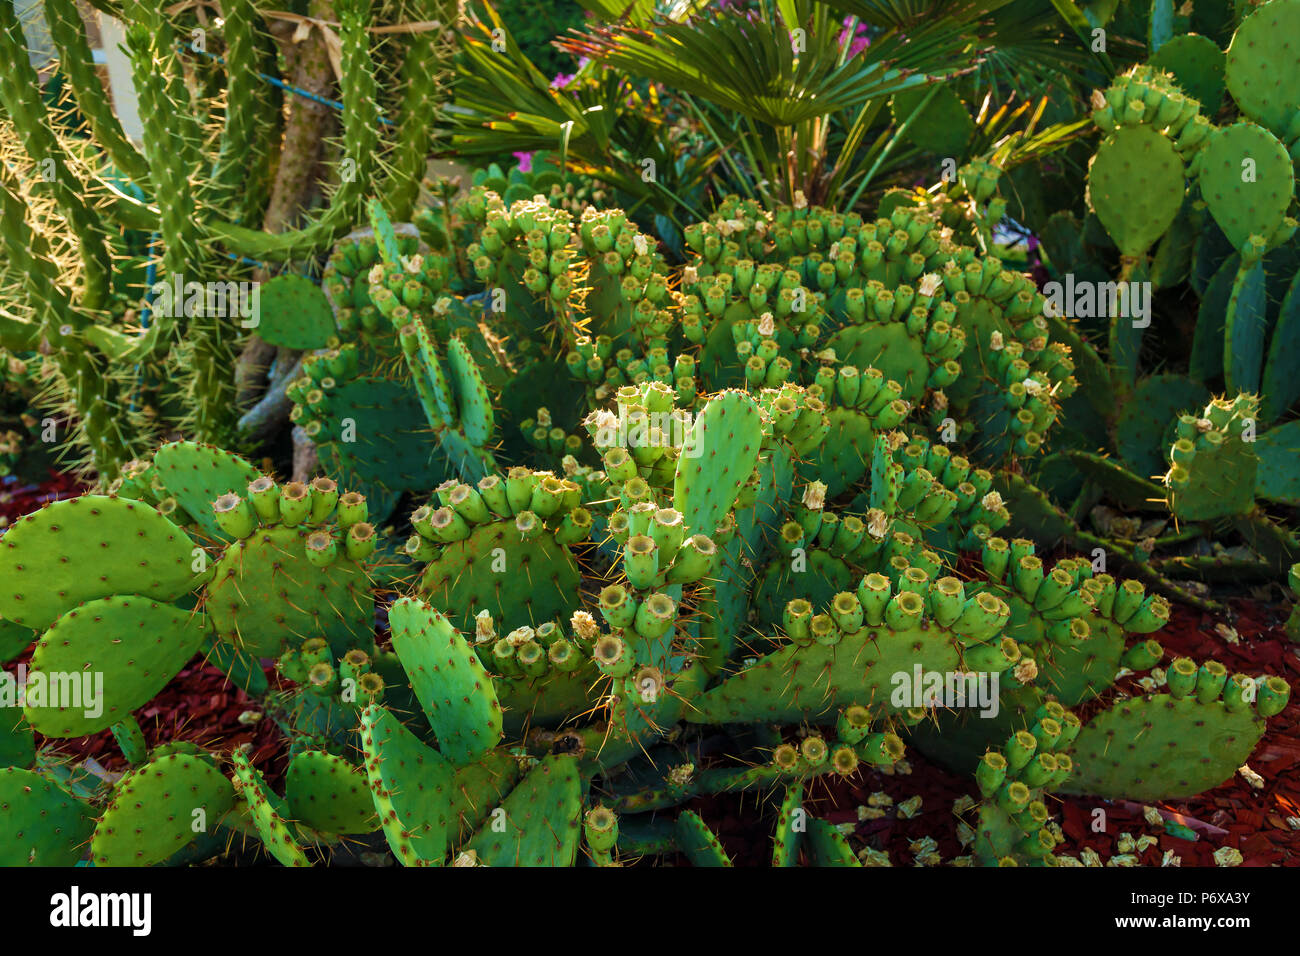 background of different types of cactus growing on the street Stock Photo